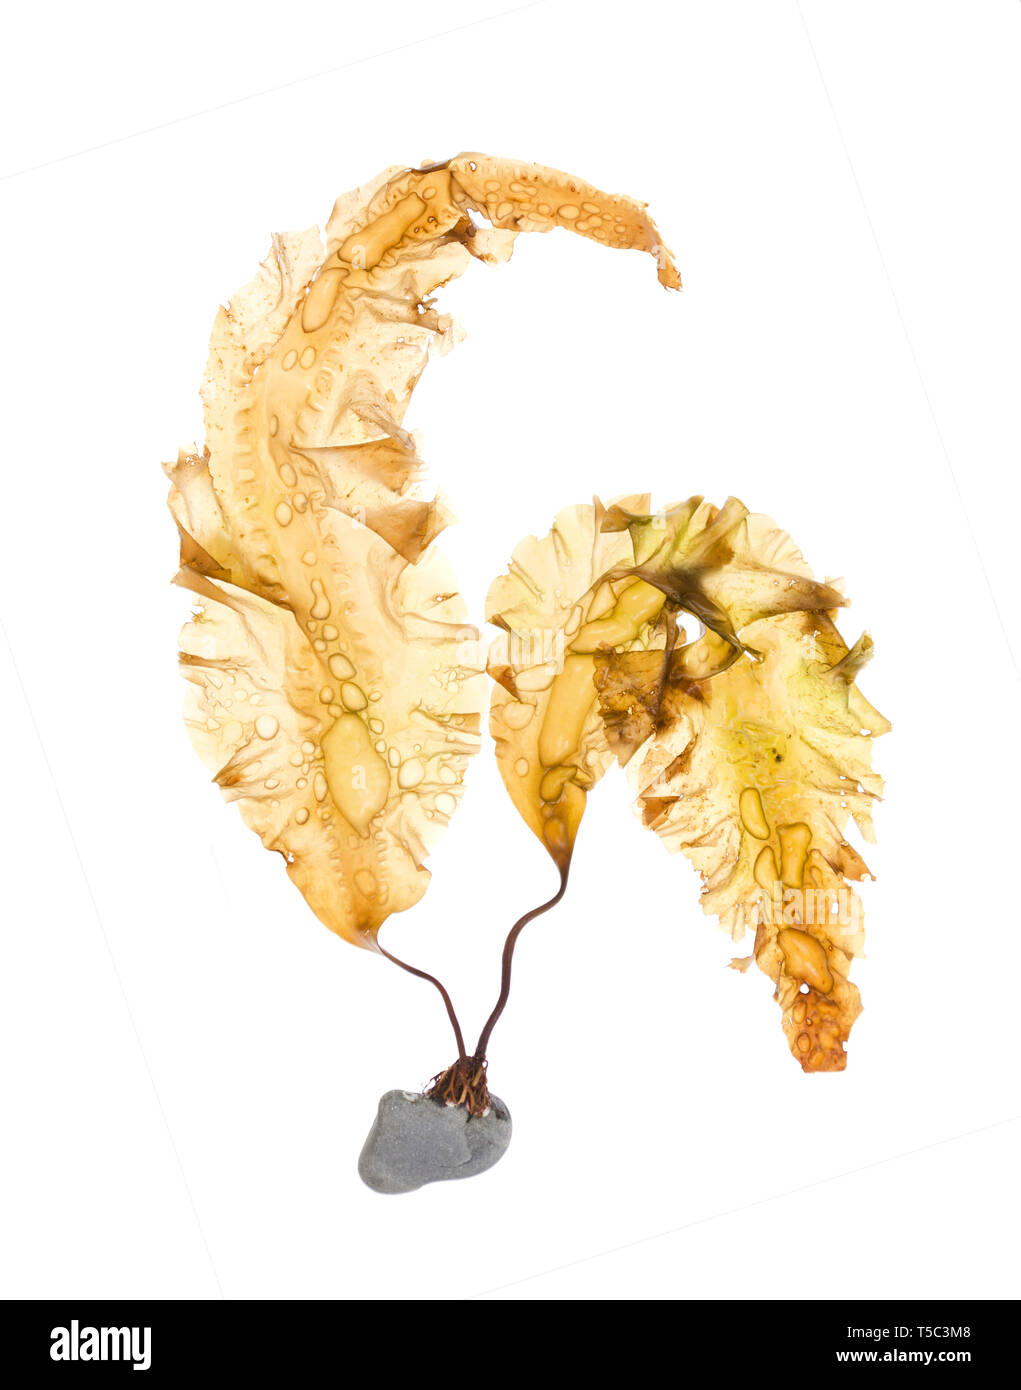 Saccharina latissima (Sugar Kelp) with holdfast attached to a rock; photographed on a light box/white background (vertical orientation.) Stock Photo